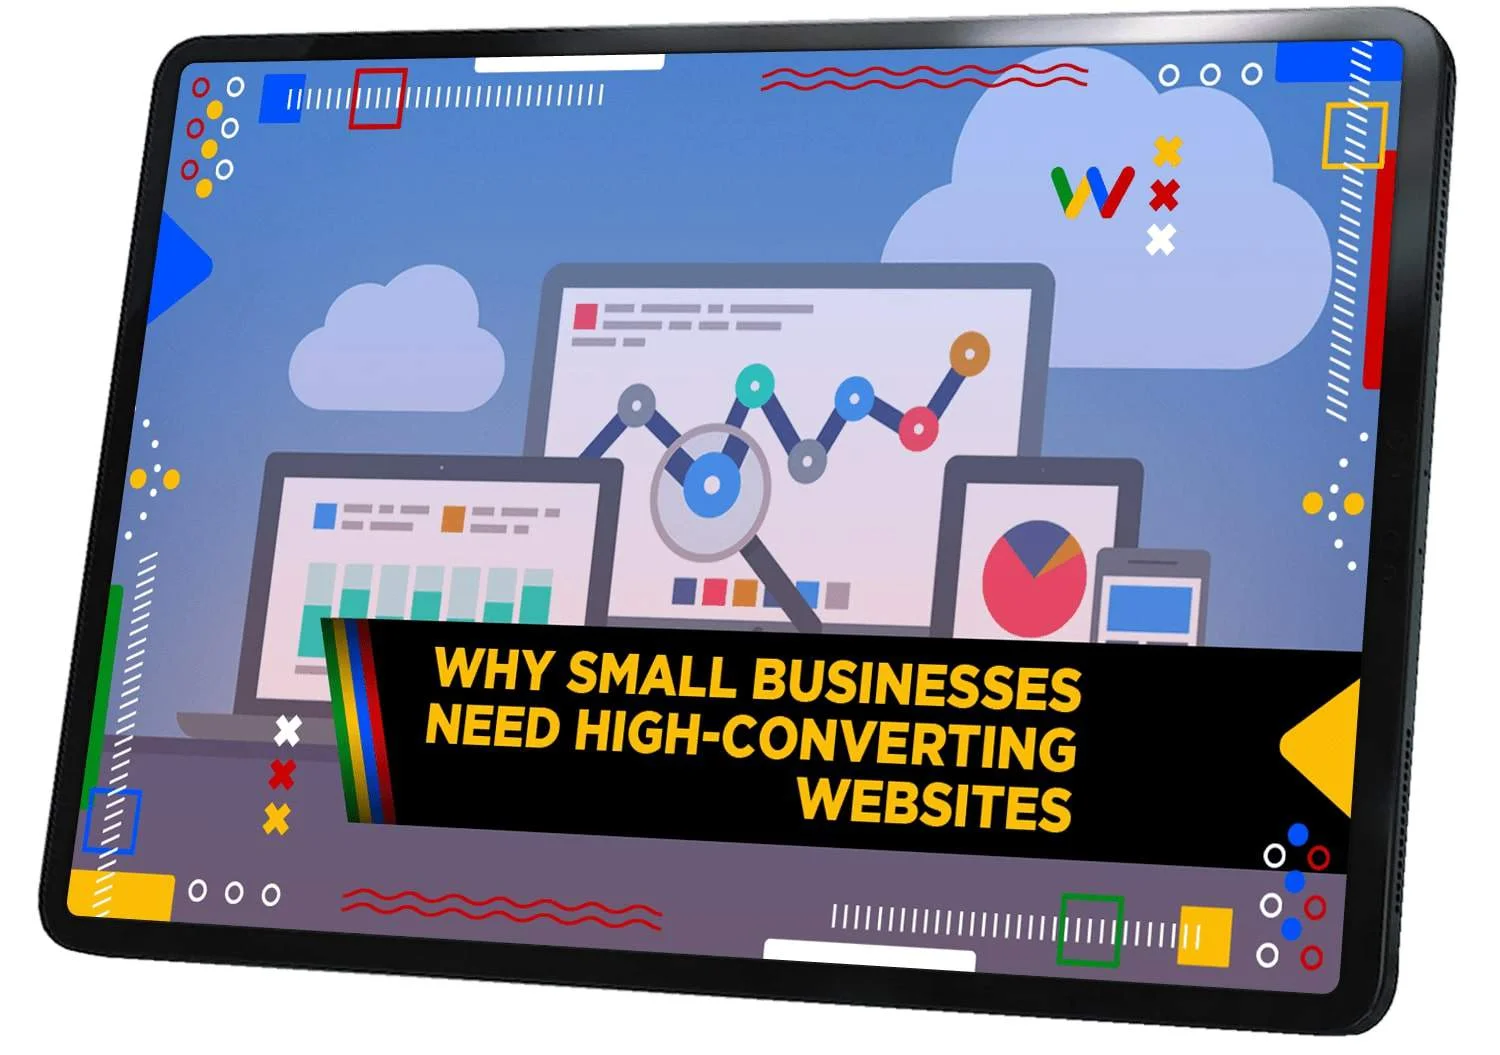 Why Small Businesses Need High-Converting Websites